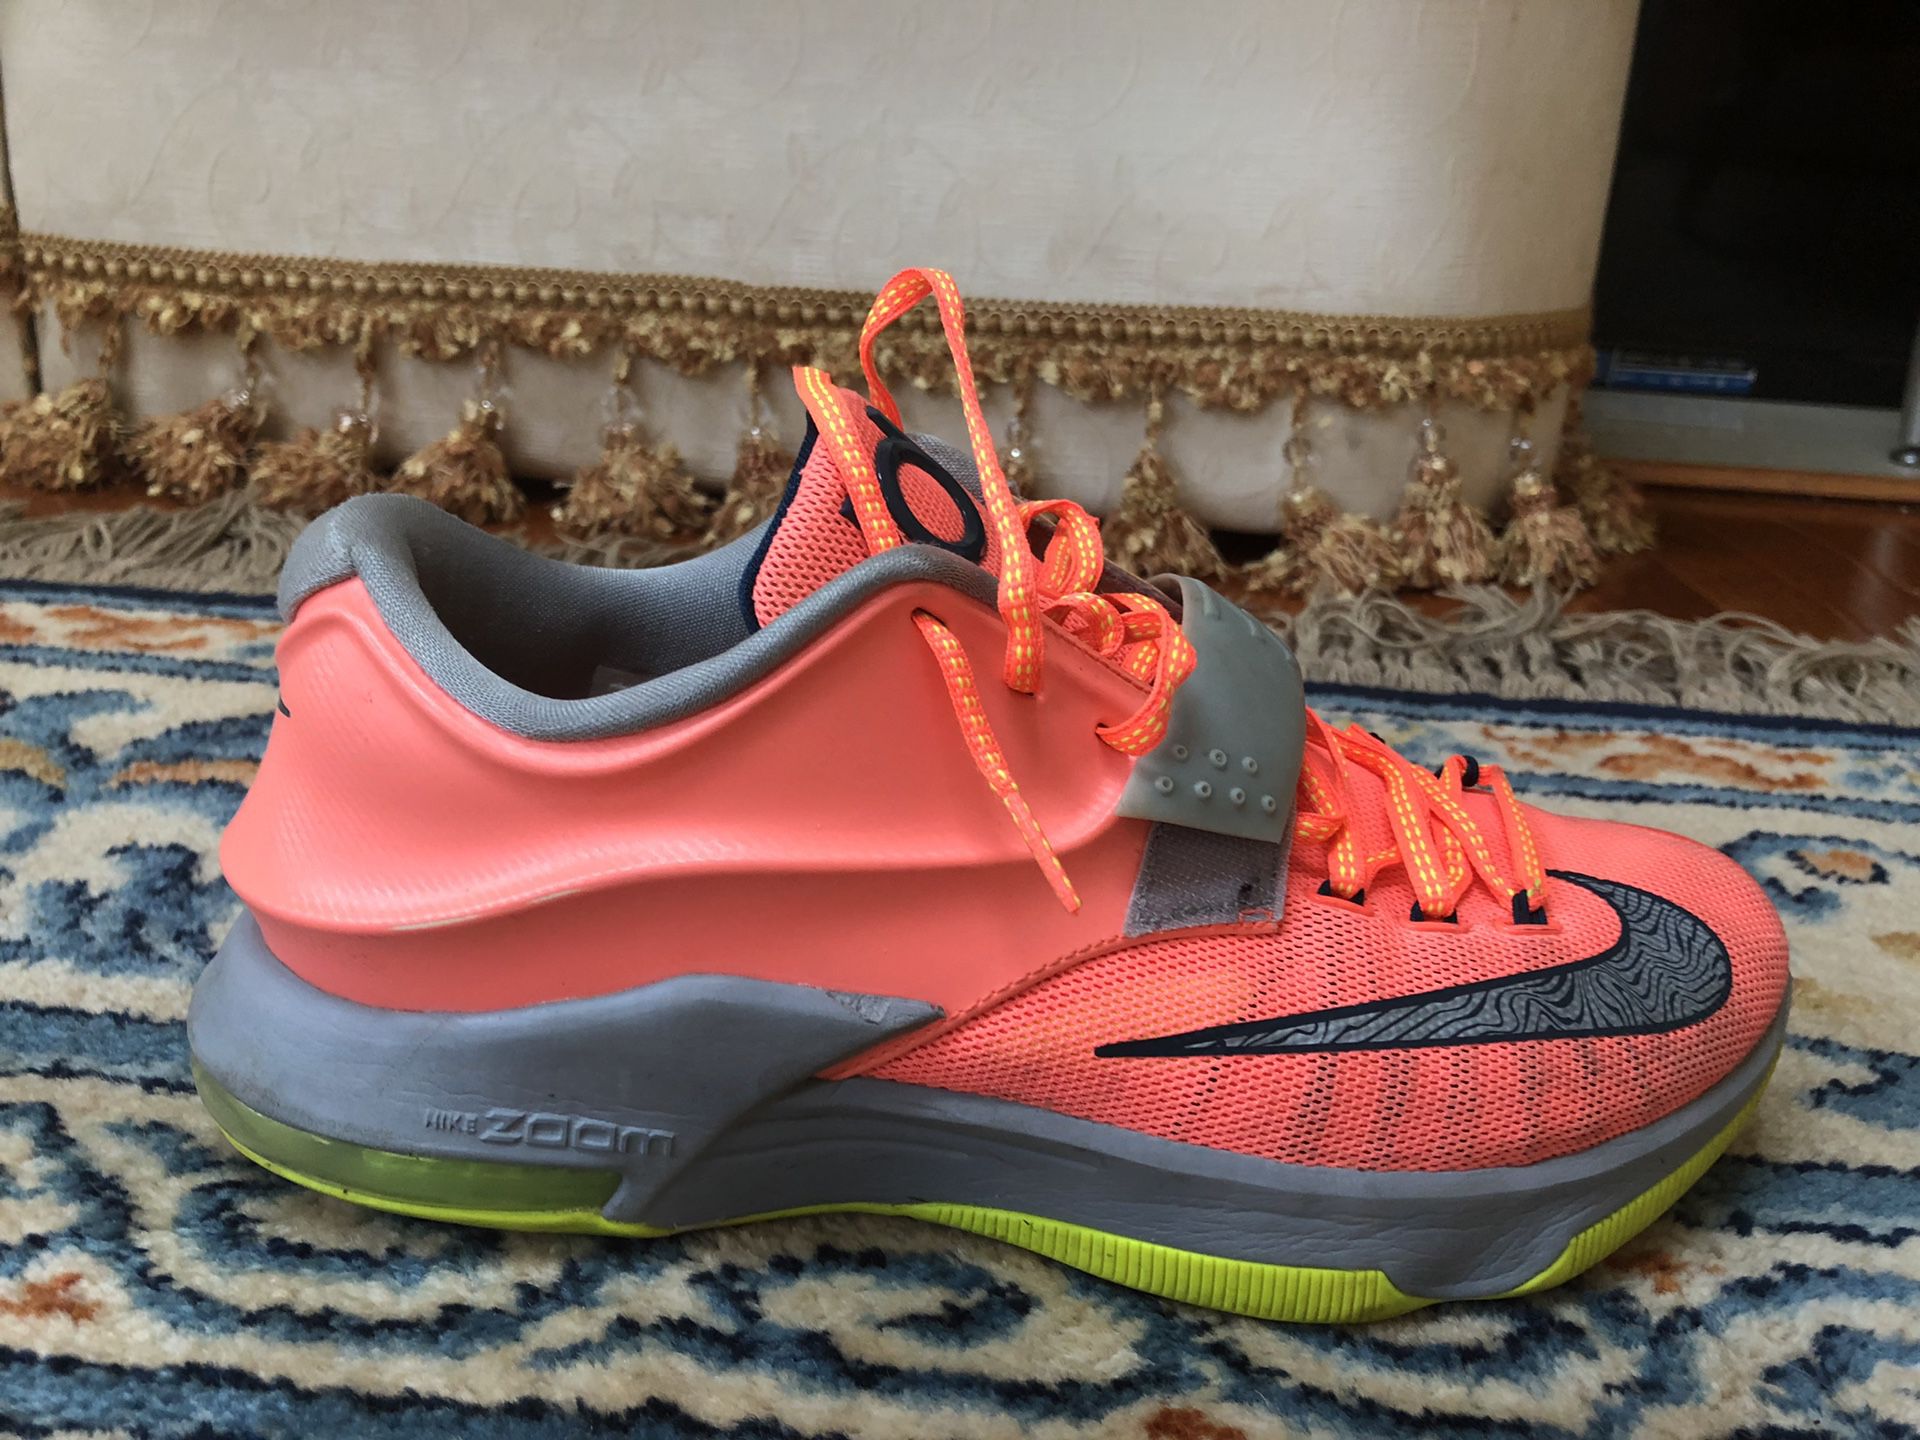 Kd 7 Kevin Durant Nike shoes